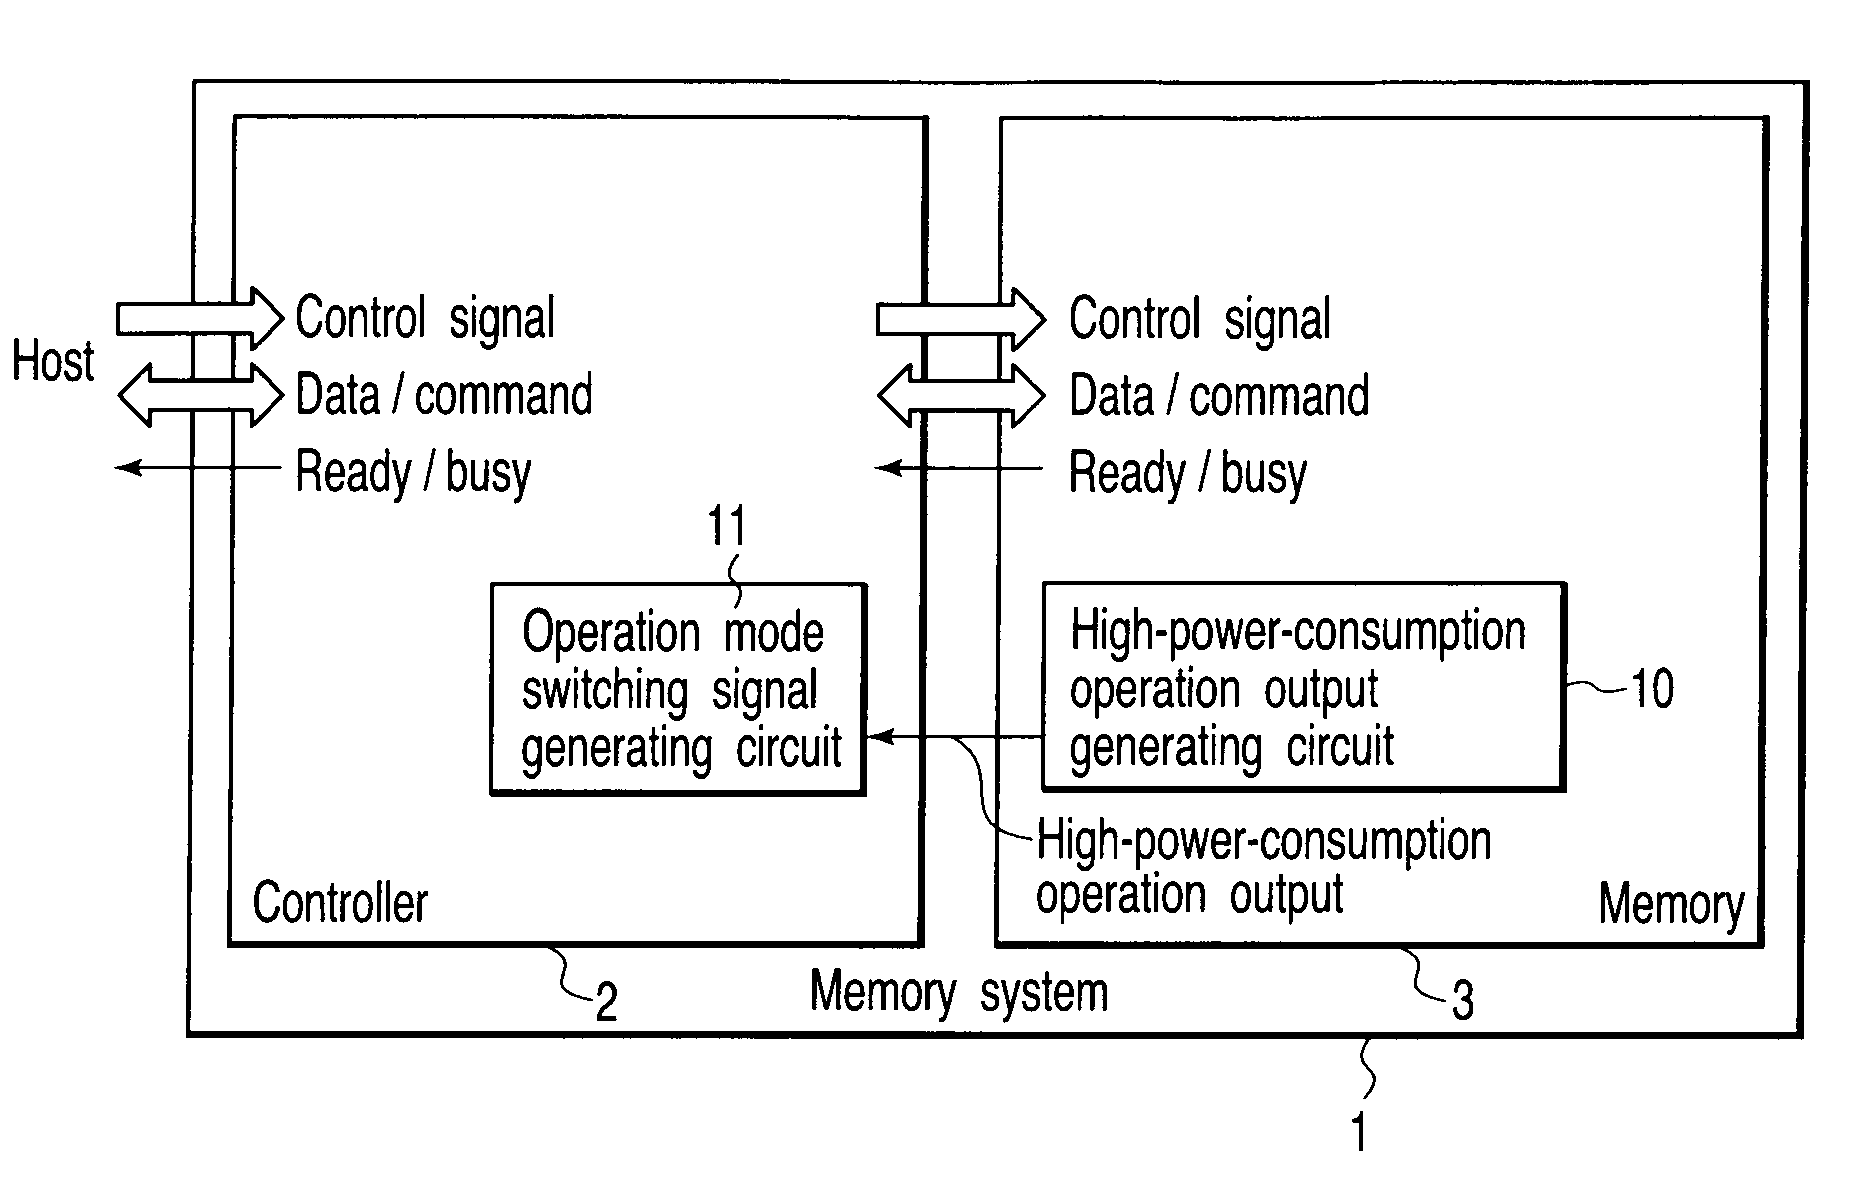 Memory system and memory chip